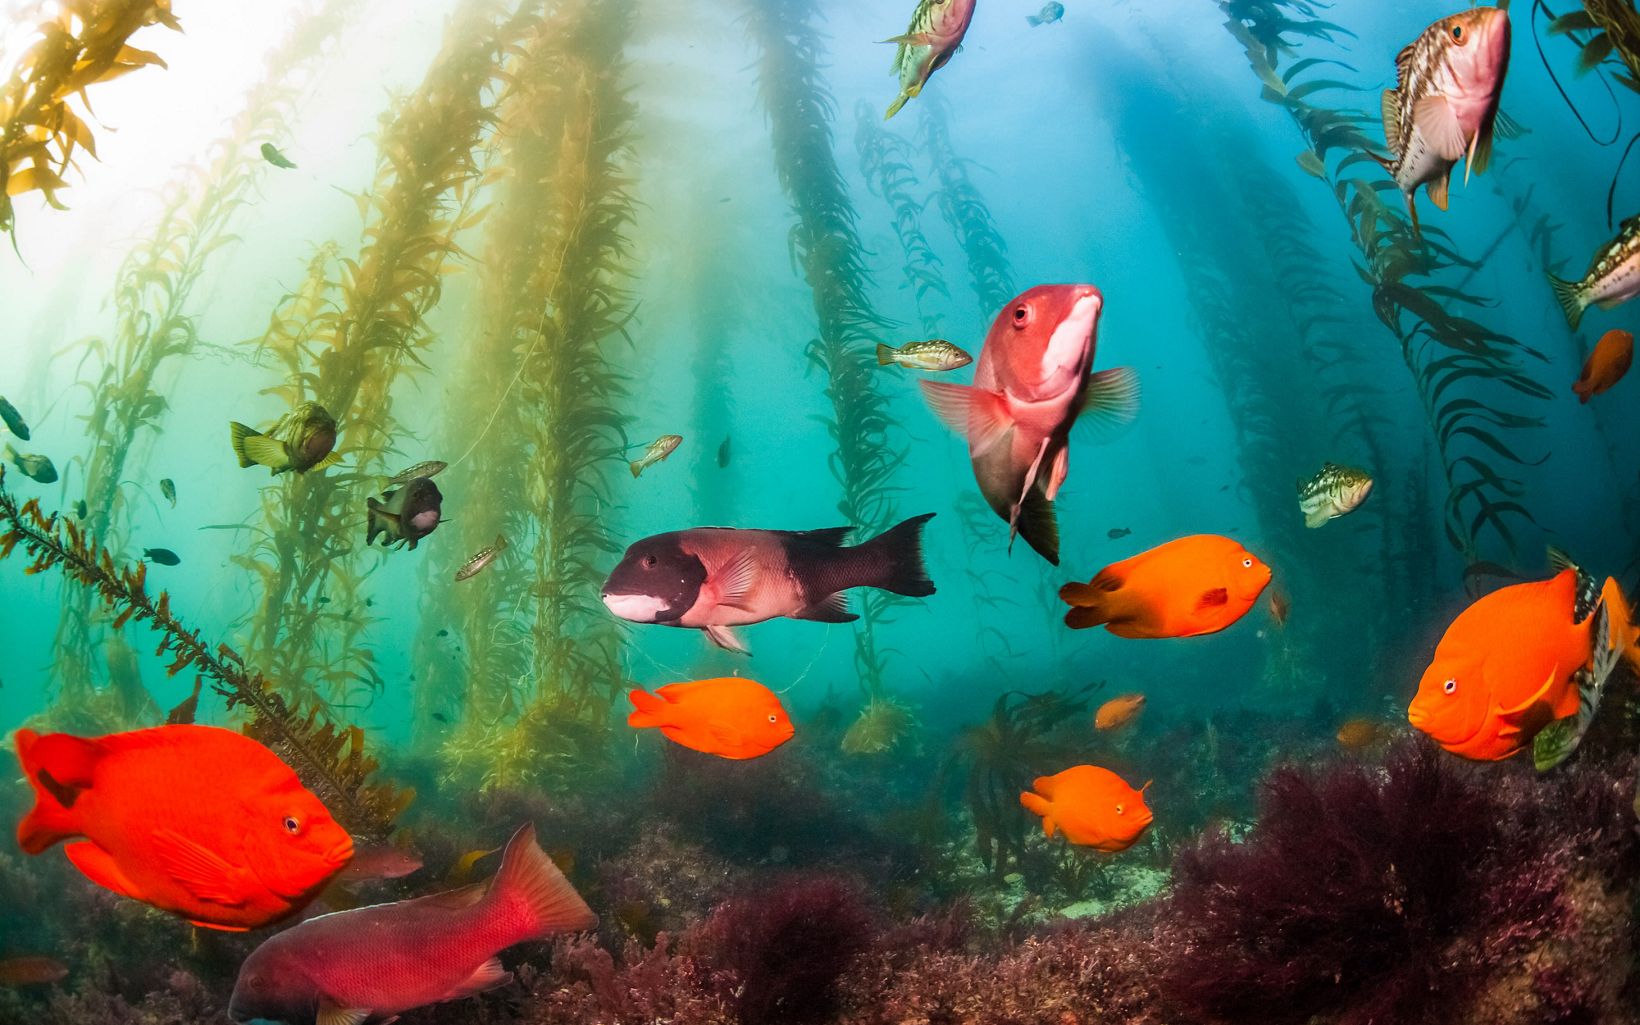 Orange, red and silver fish swimming near the sea floor among tall kelp plants.